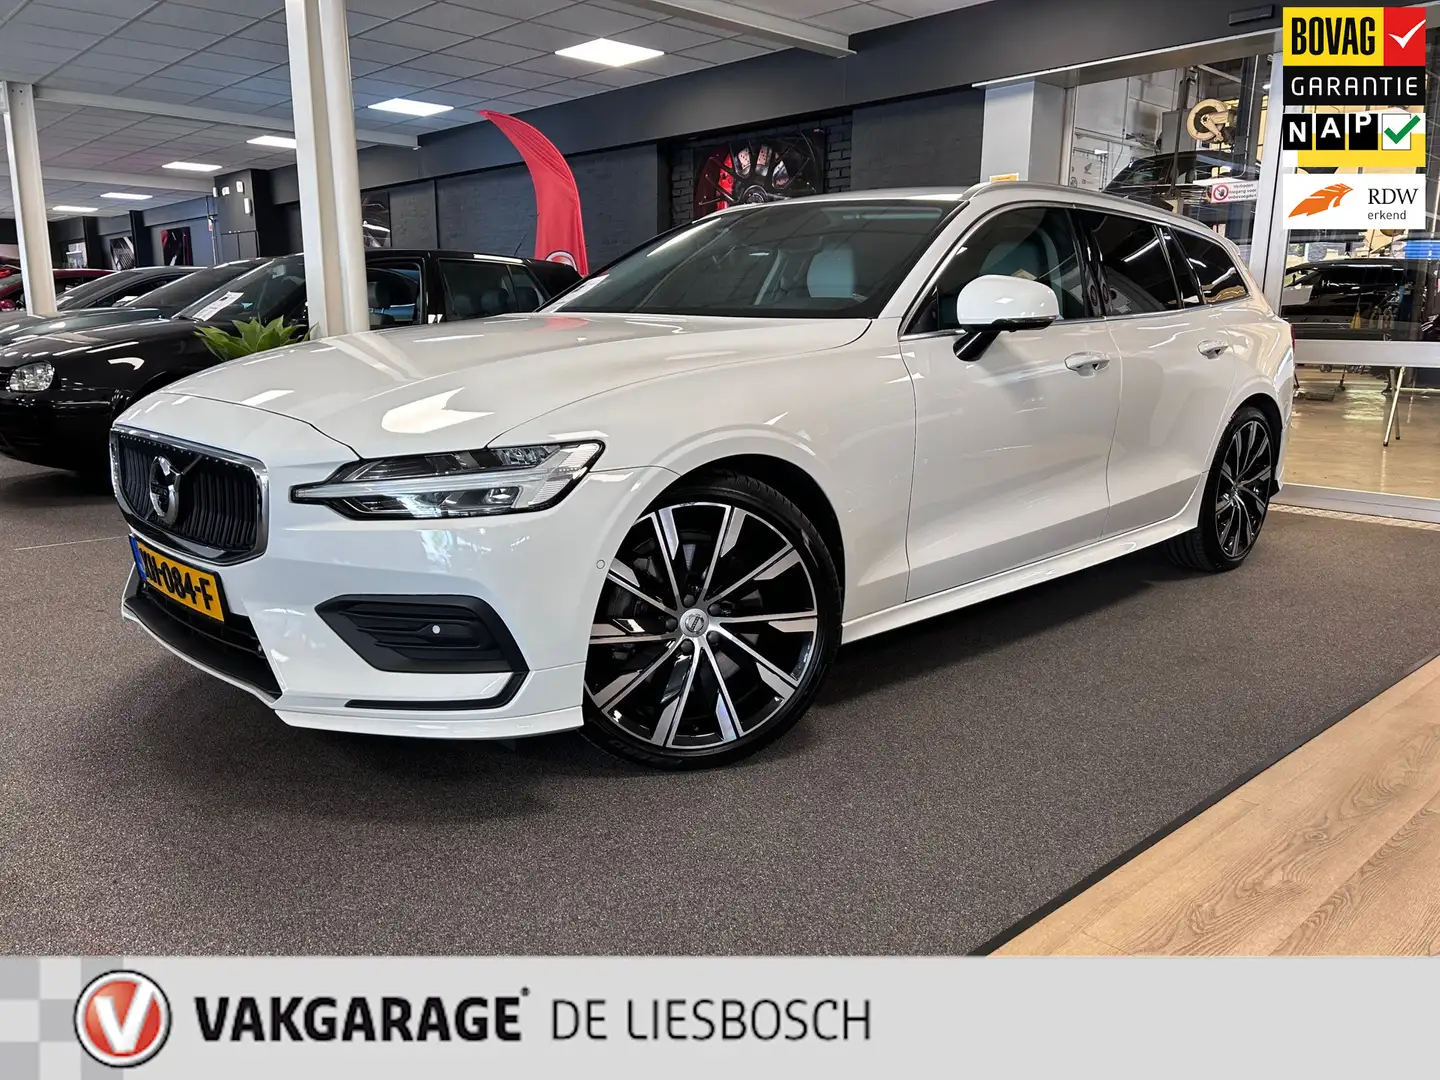 Volvo V60 2.0 T5 Momentum/Styling kit/Automaat/Led/20inch/36 Blanc - 1